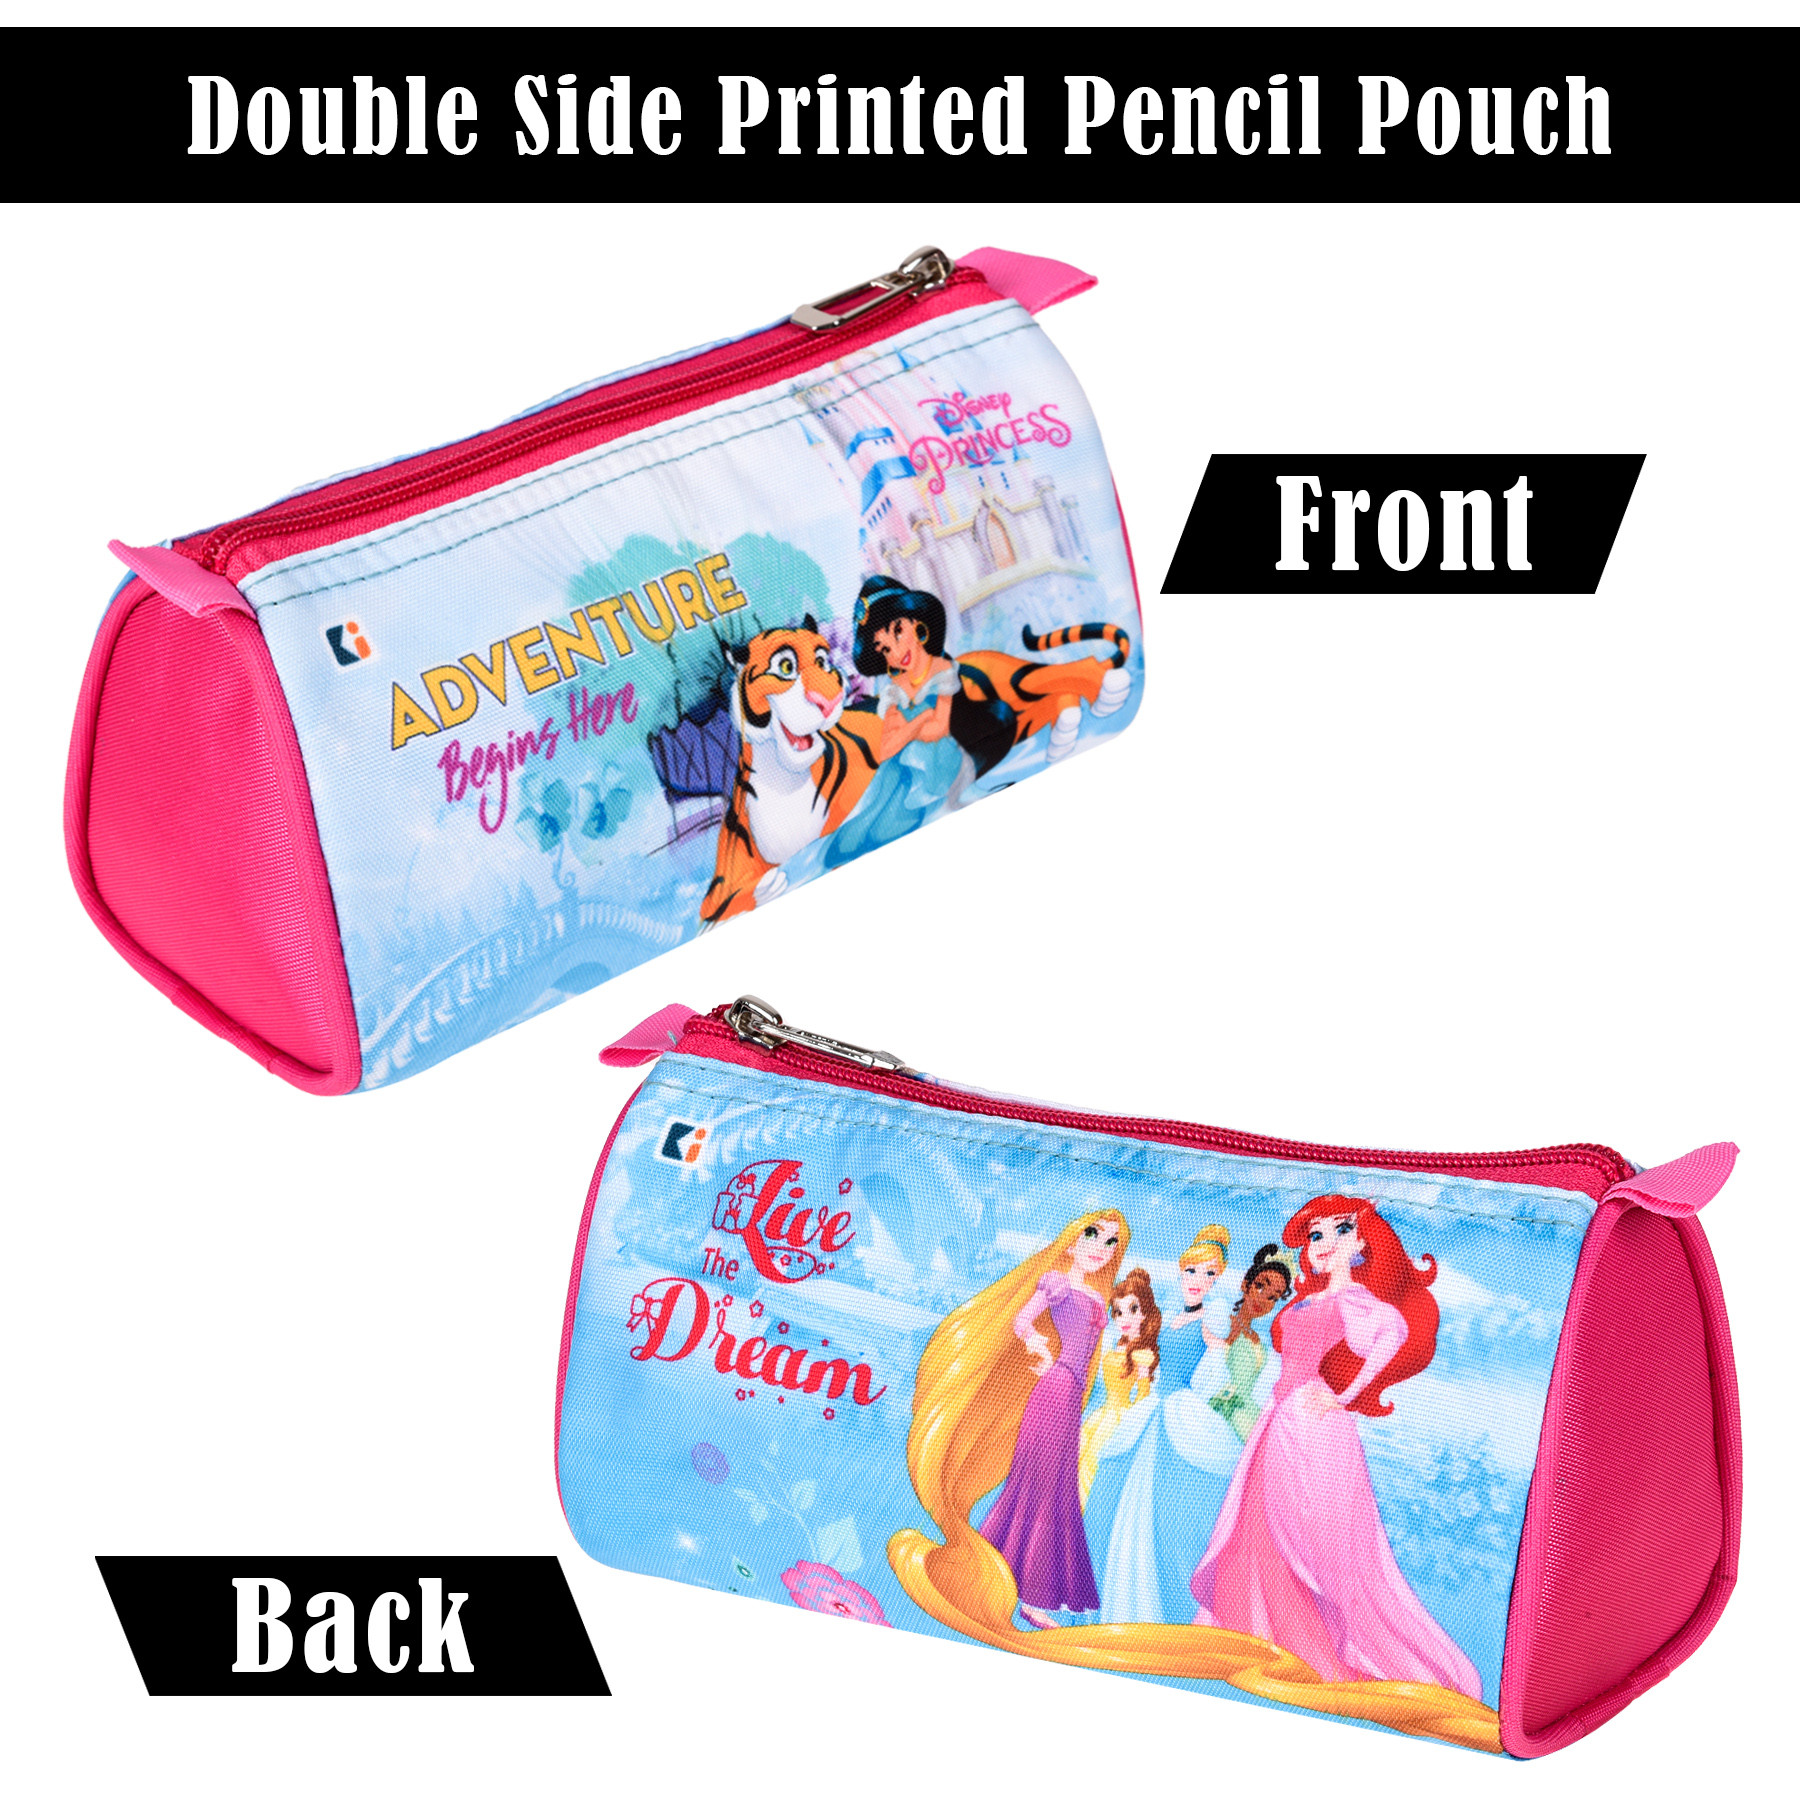 Kuber Industries Pencil Pouch | Multi-Purpose Travel Pouch | Kids Stationary Storage Bag | Pencil Utility School Pouches | Geometry Box | Disney Princess | Large | Pink & Blue